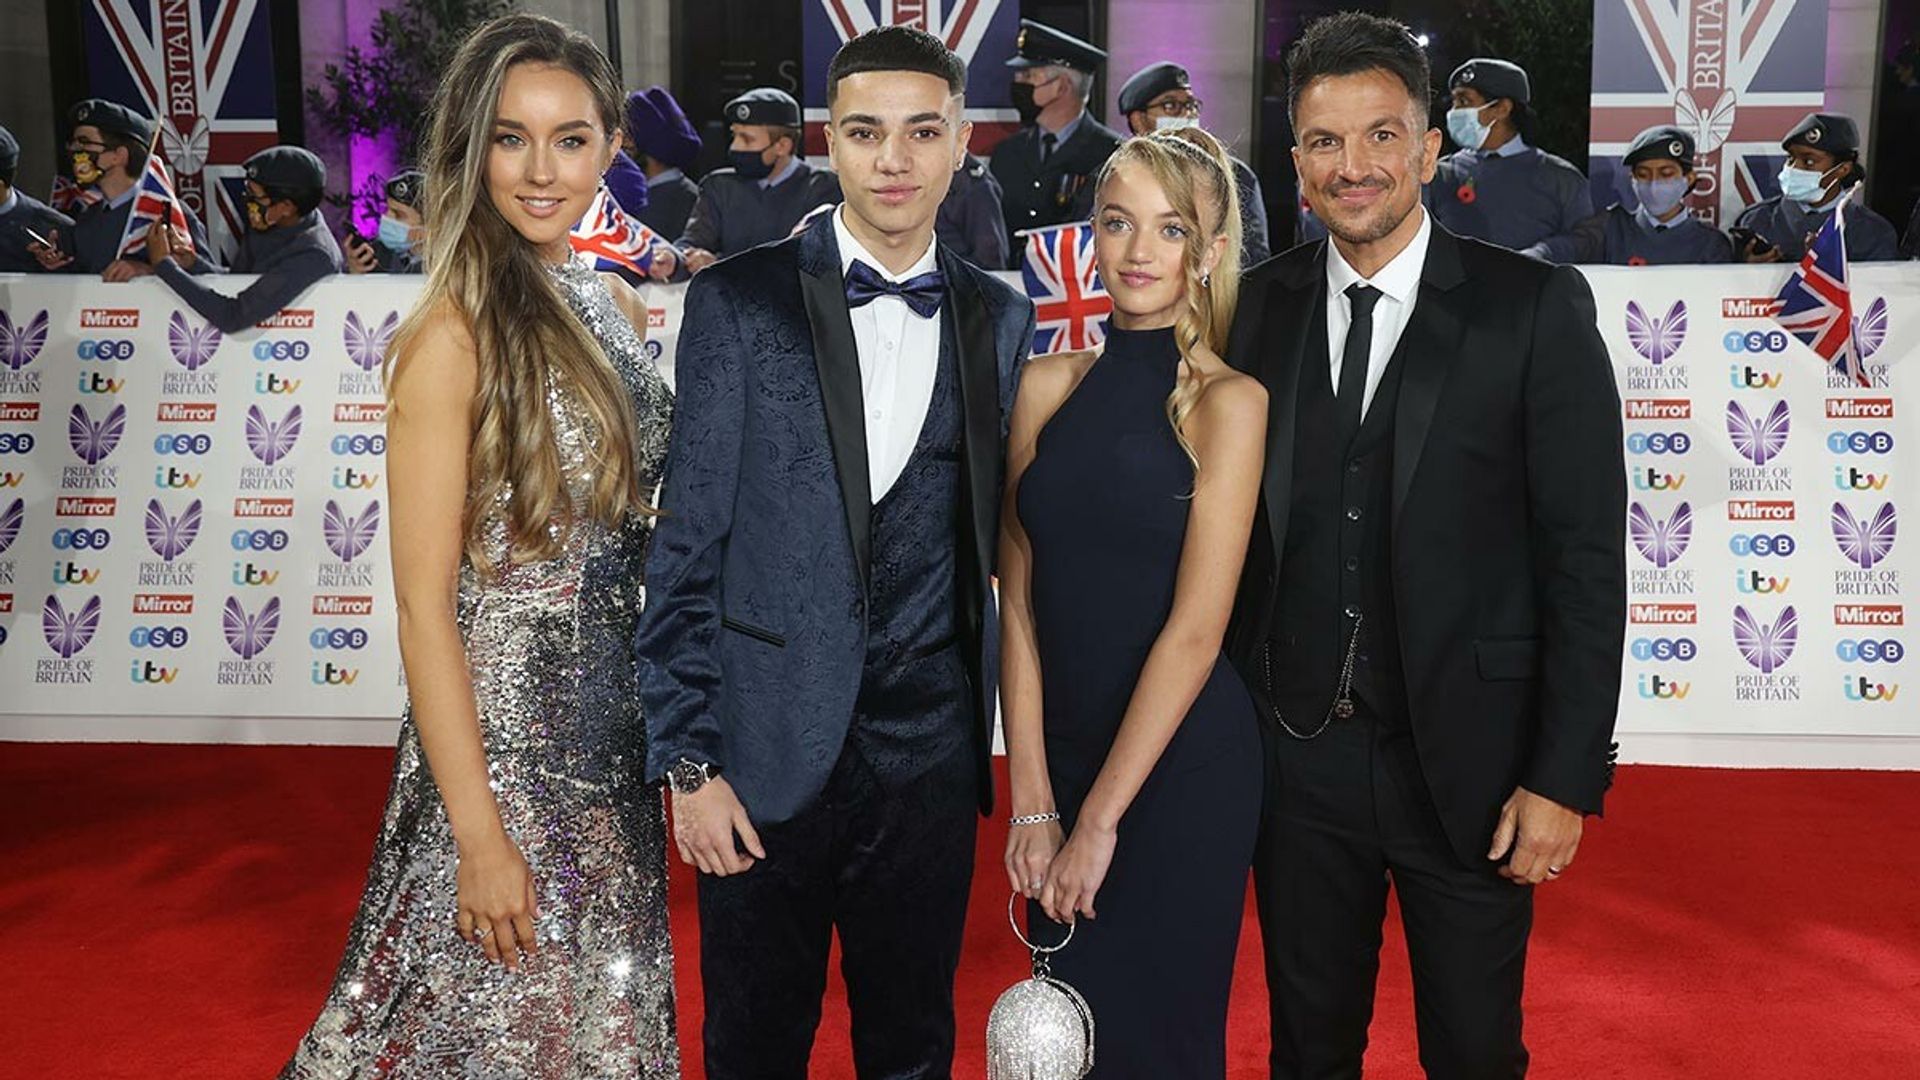 The family at the Pride of Britain awards